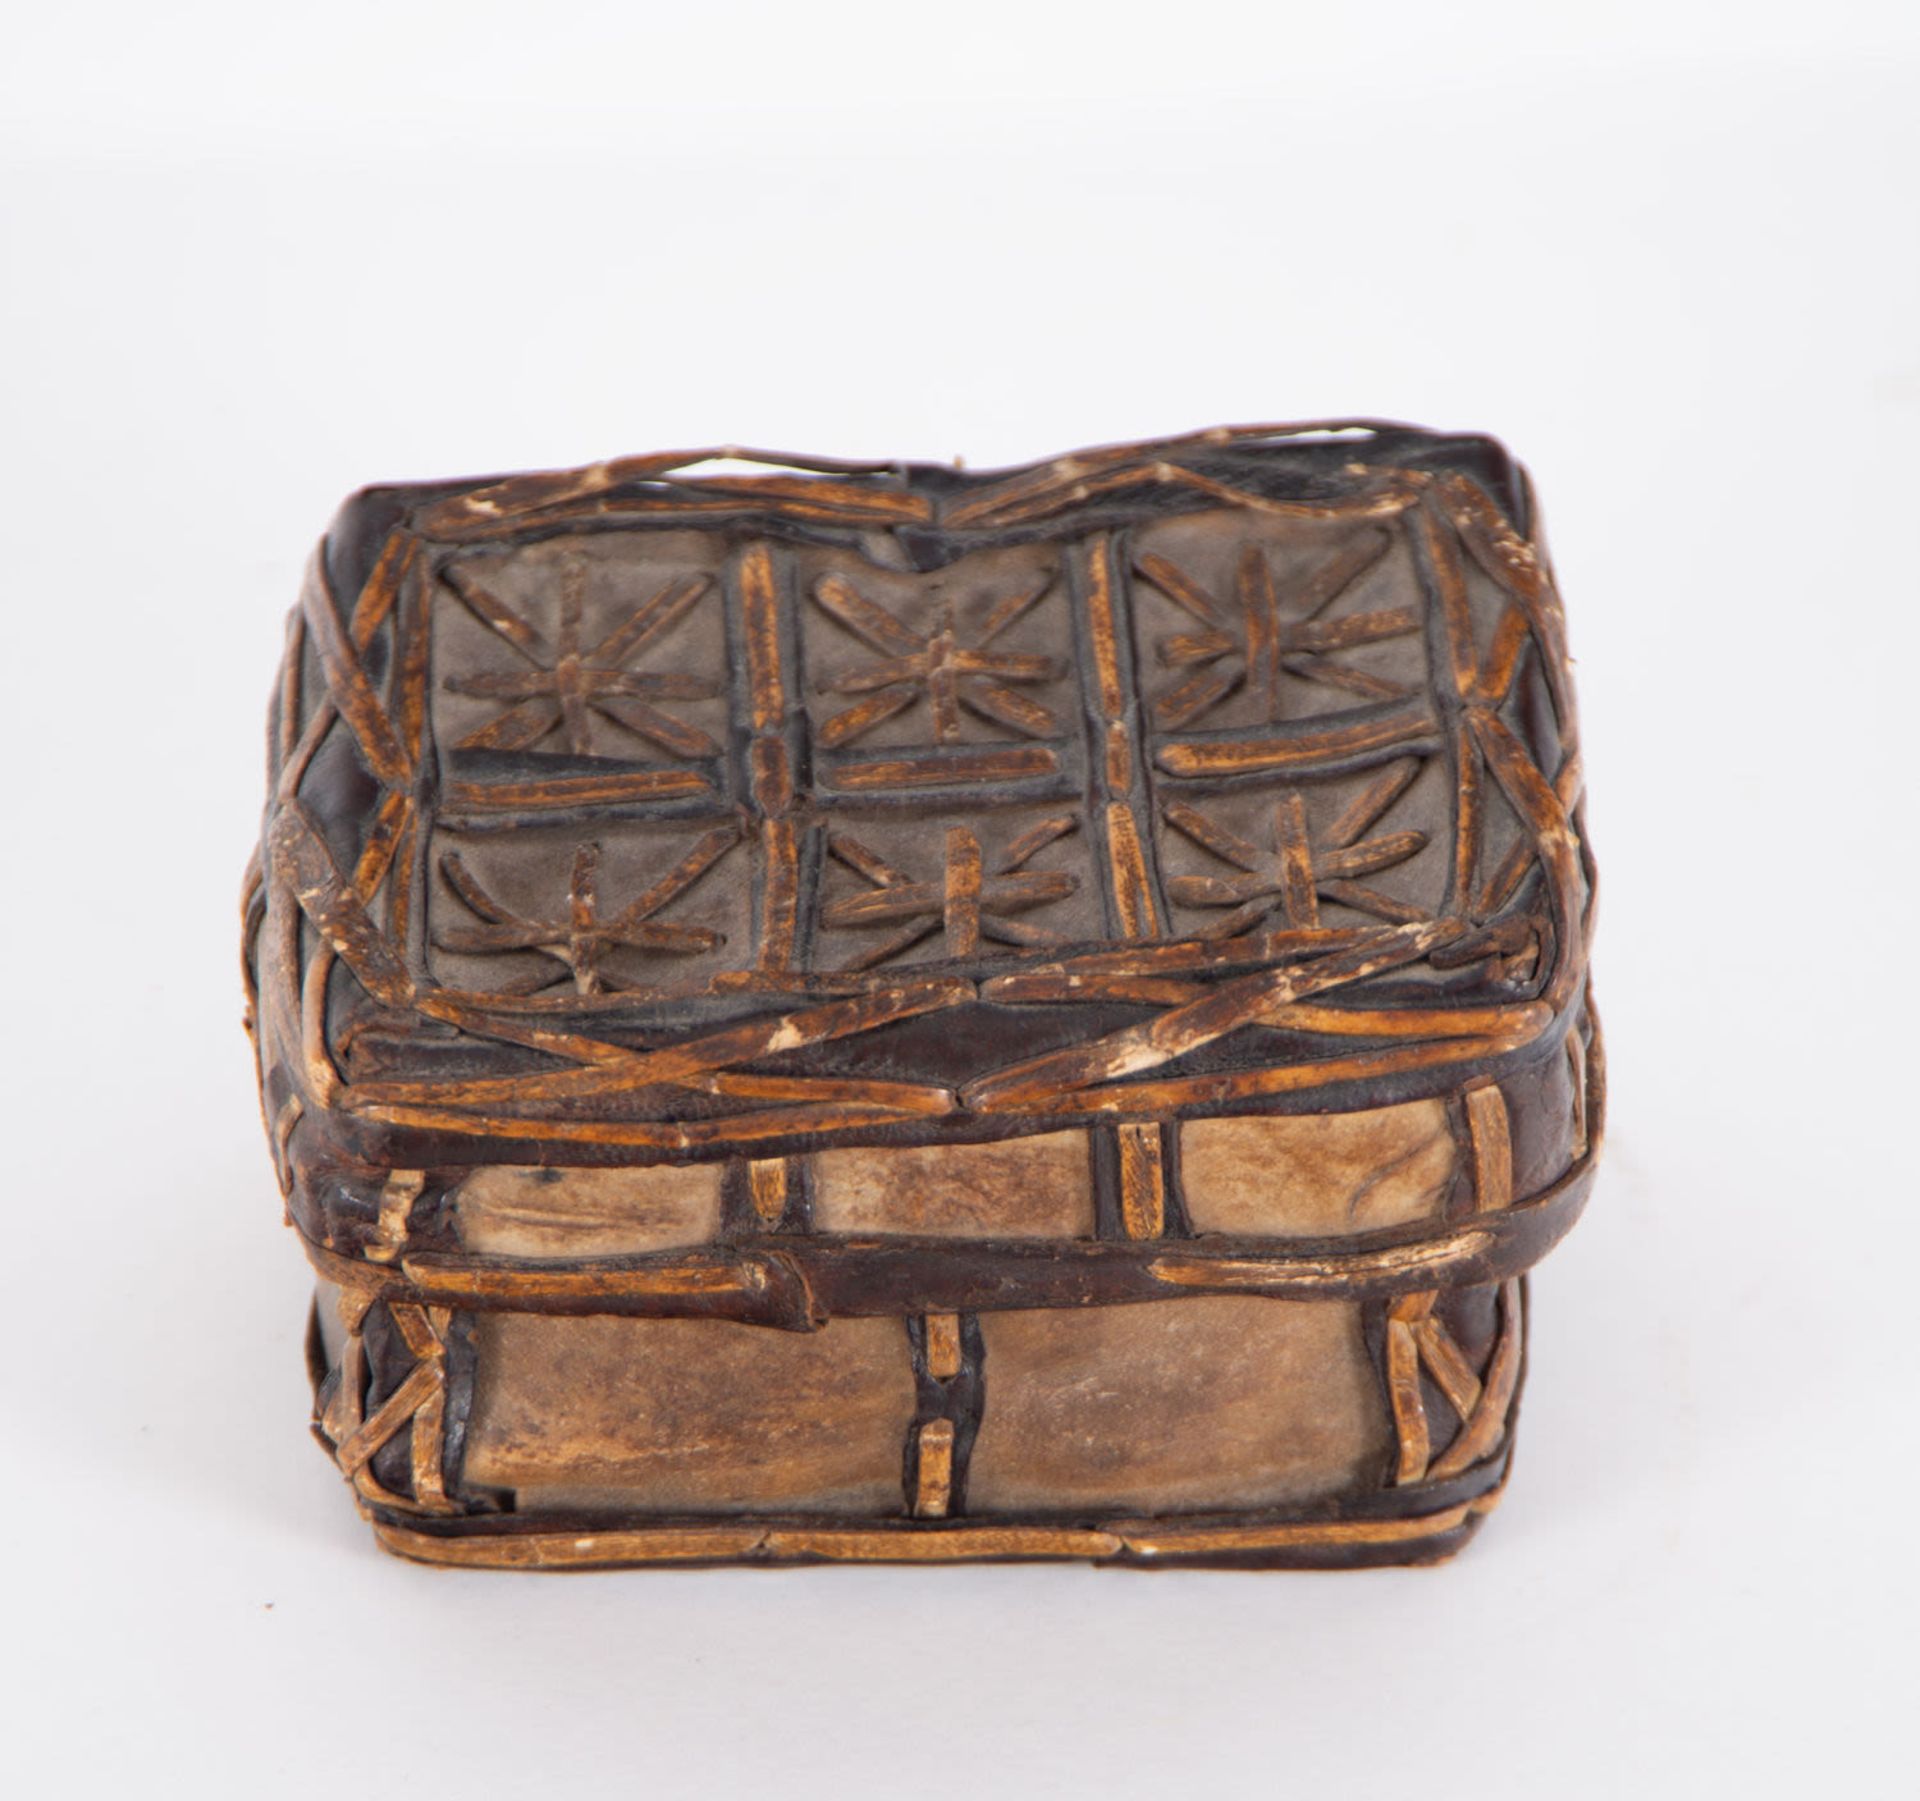 Small Mexican leather chest, 17th century - Image 3 of 7